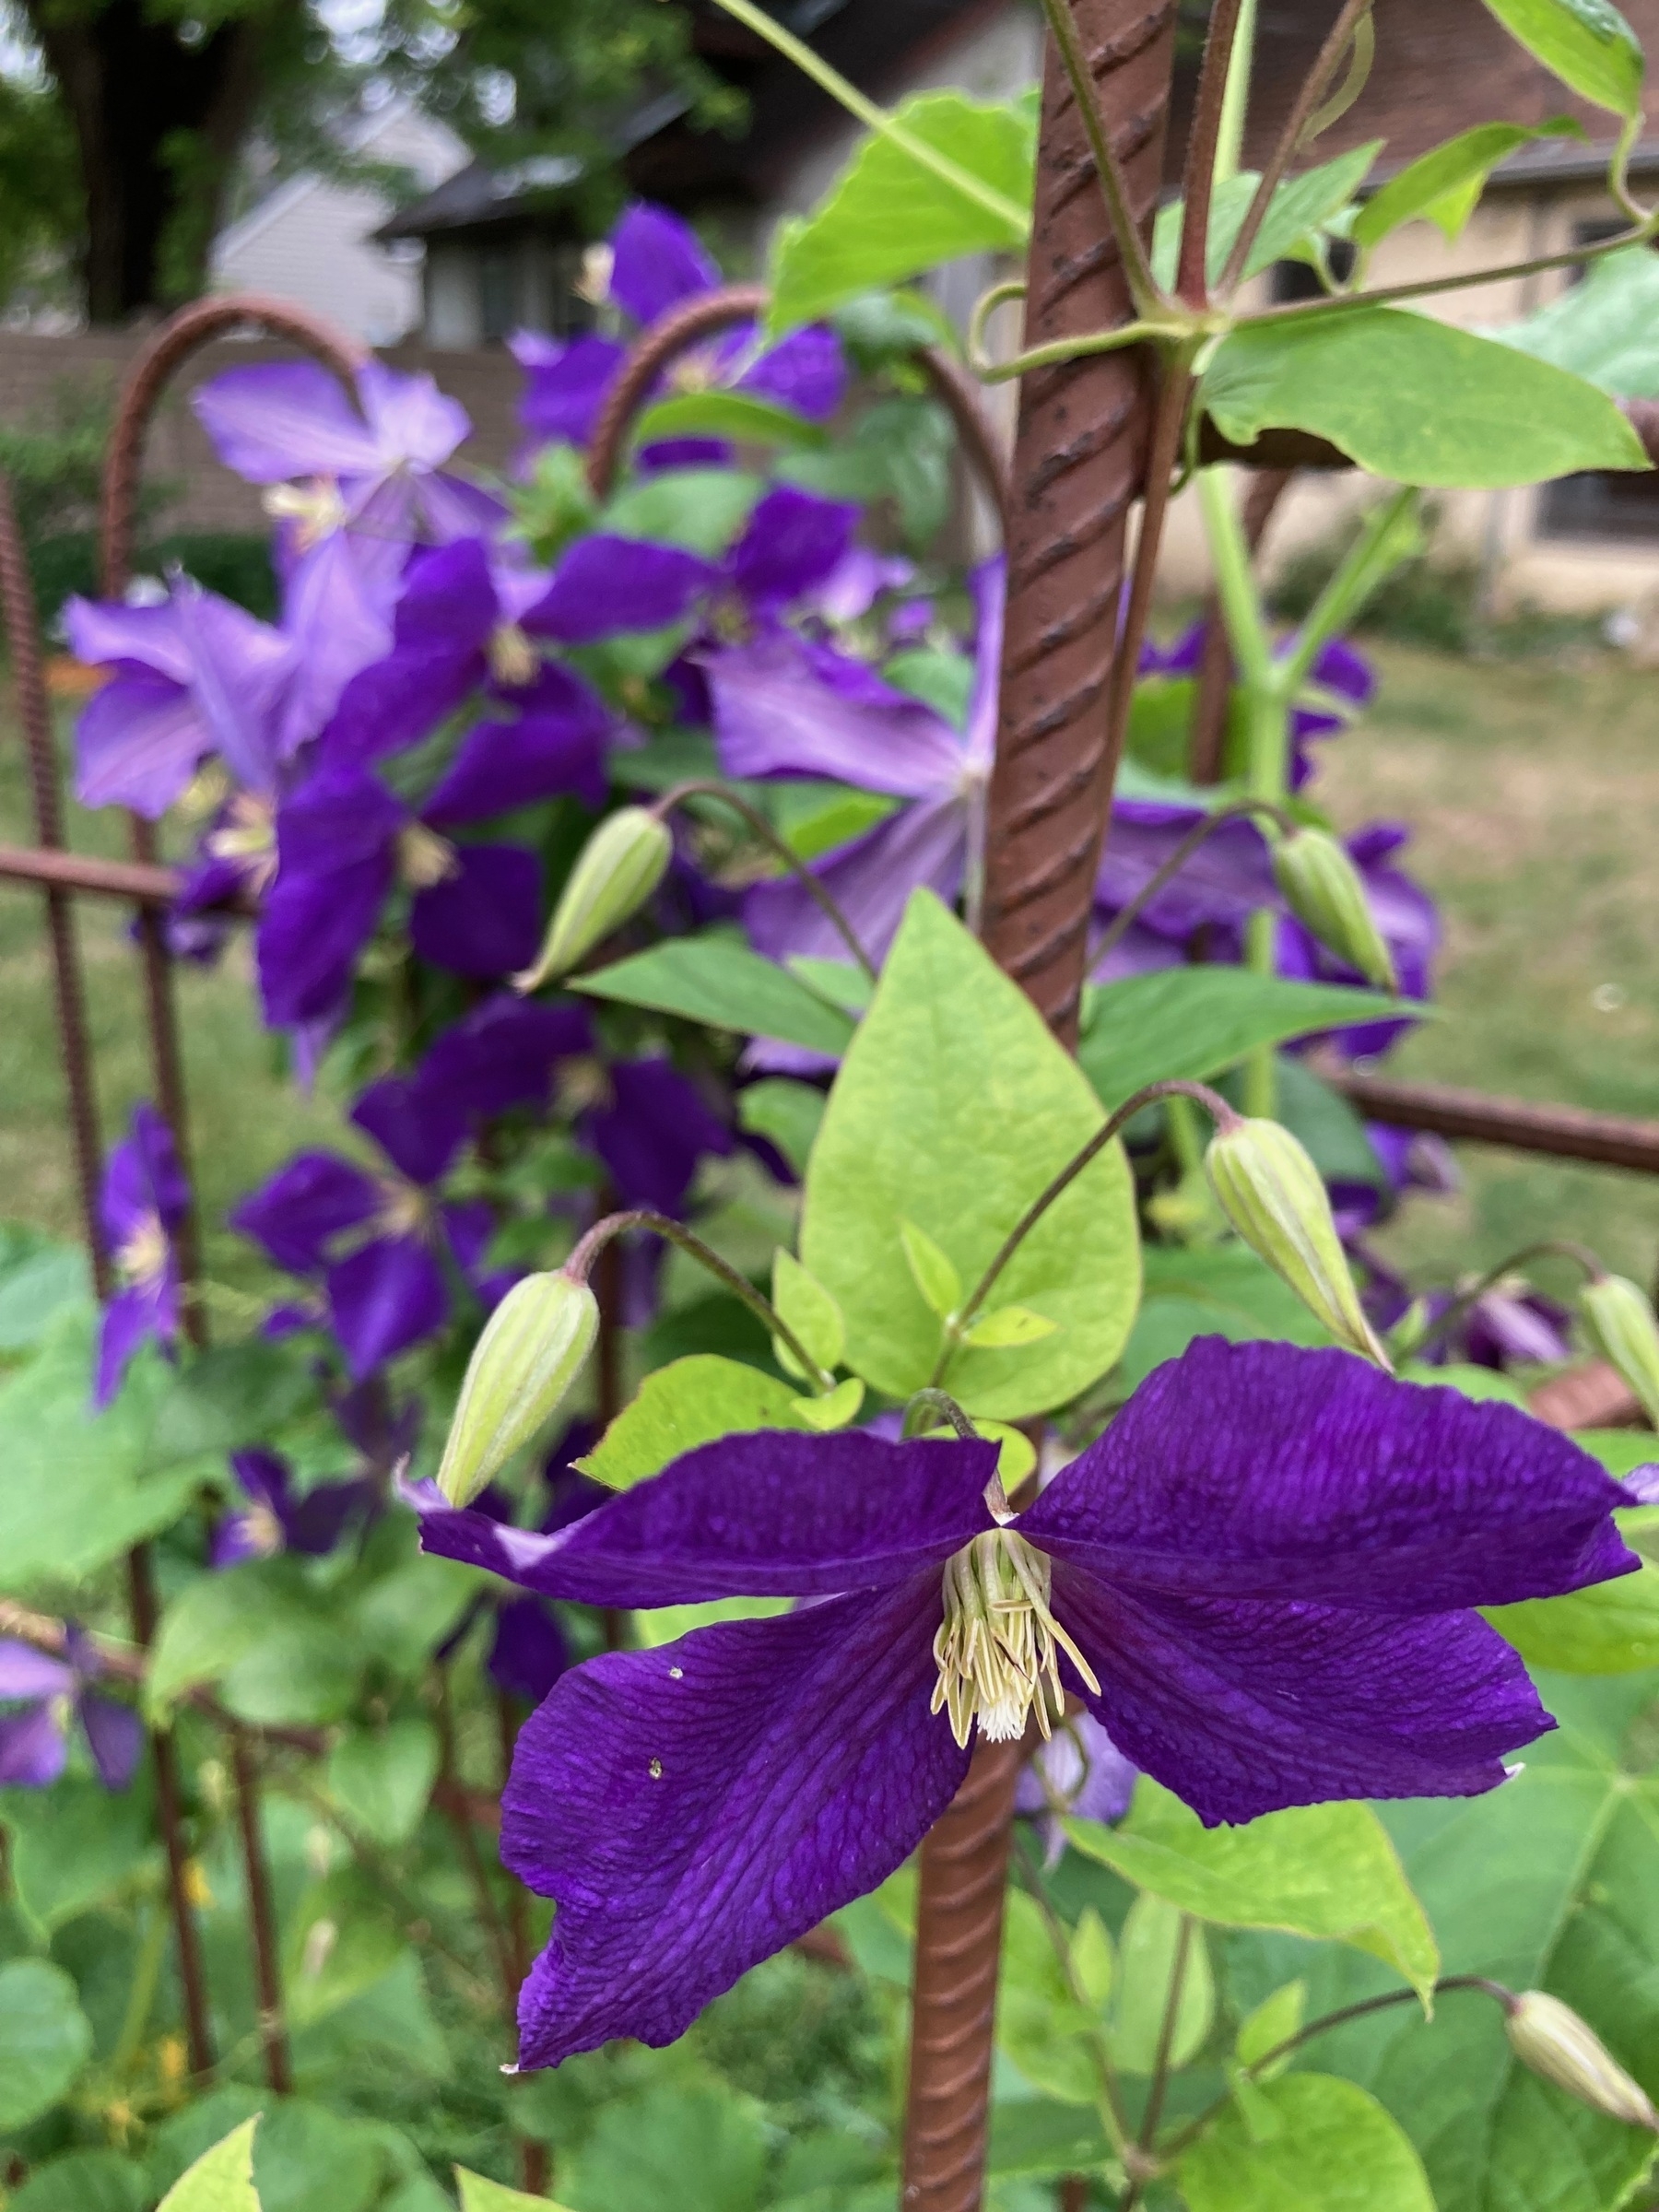 Purpled-flowered clematis vine wrapped around wrought-iron gate